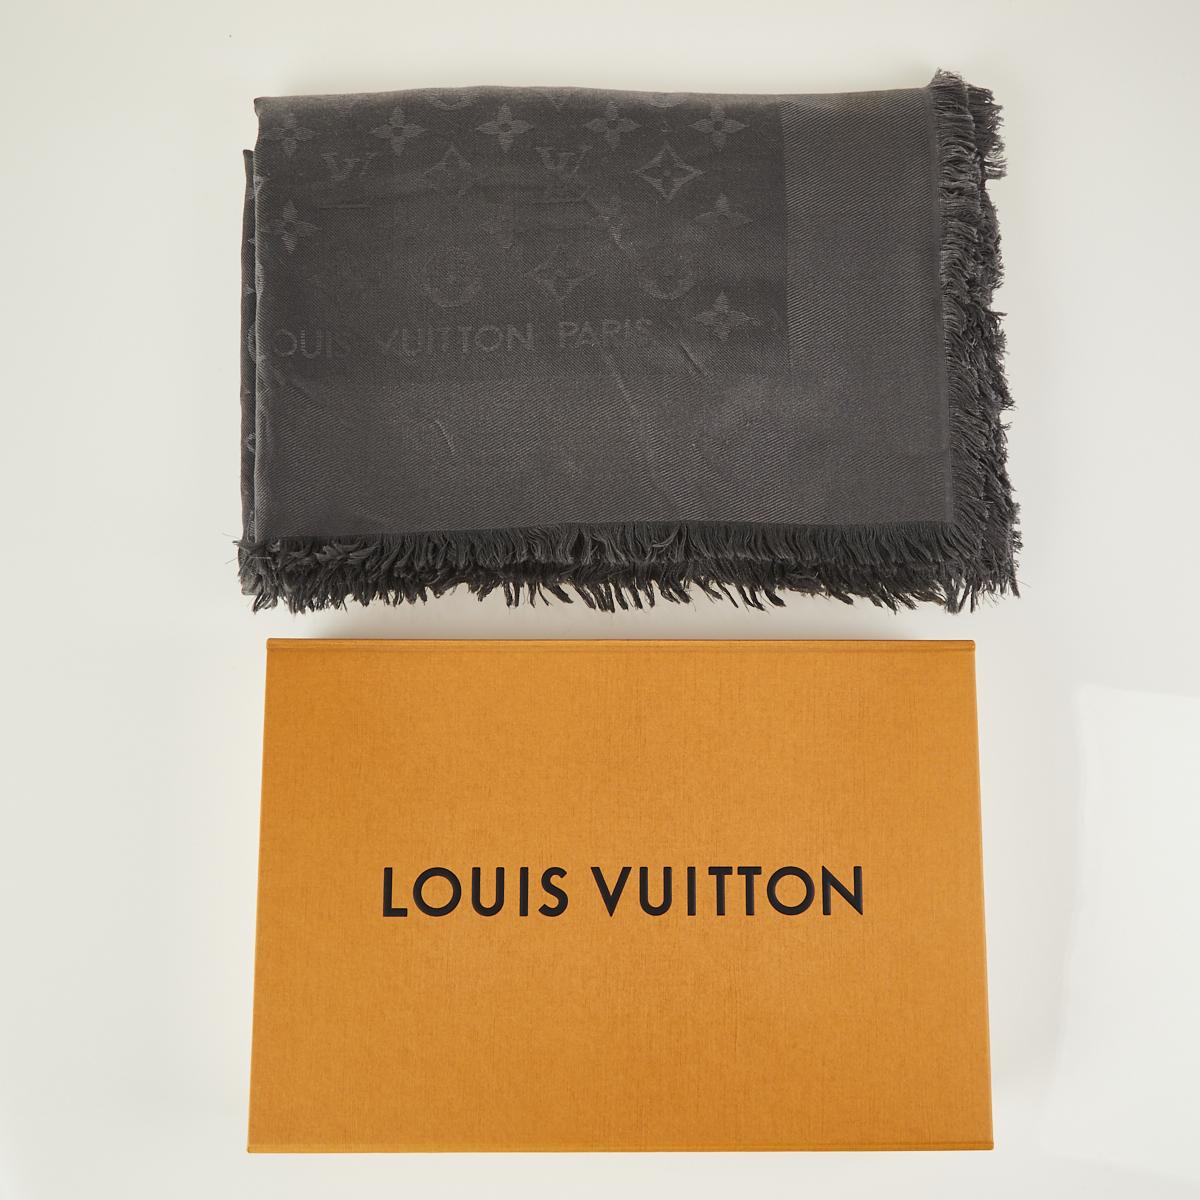 Sold at Auction: AUTHENTIC LOUIS VUITTON 60% SILK,40% WOOL SCARF